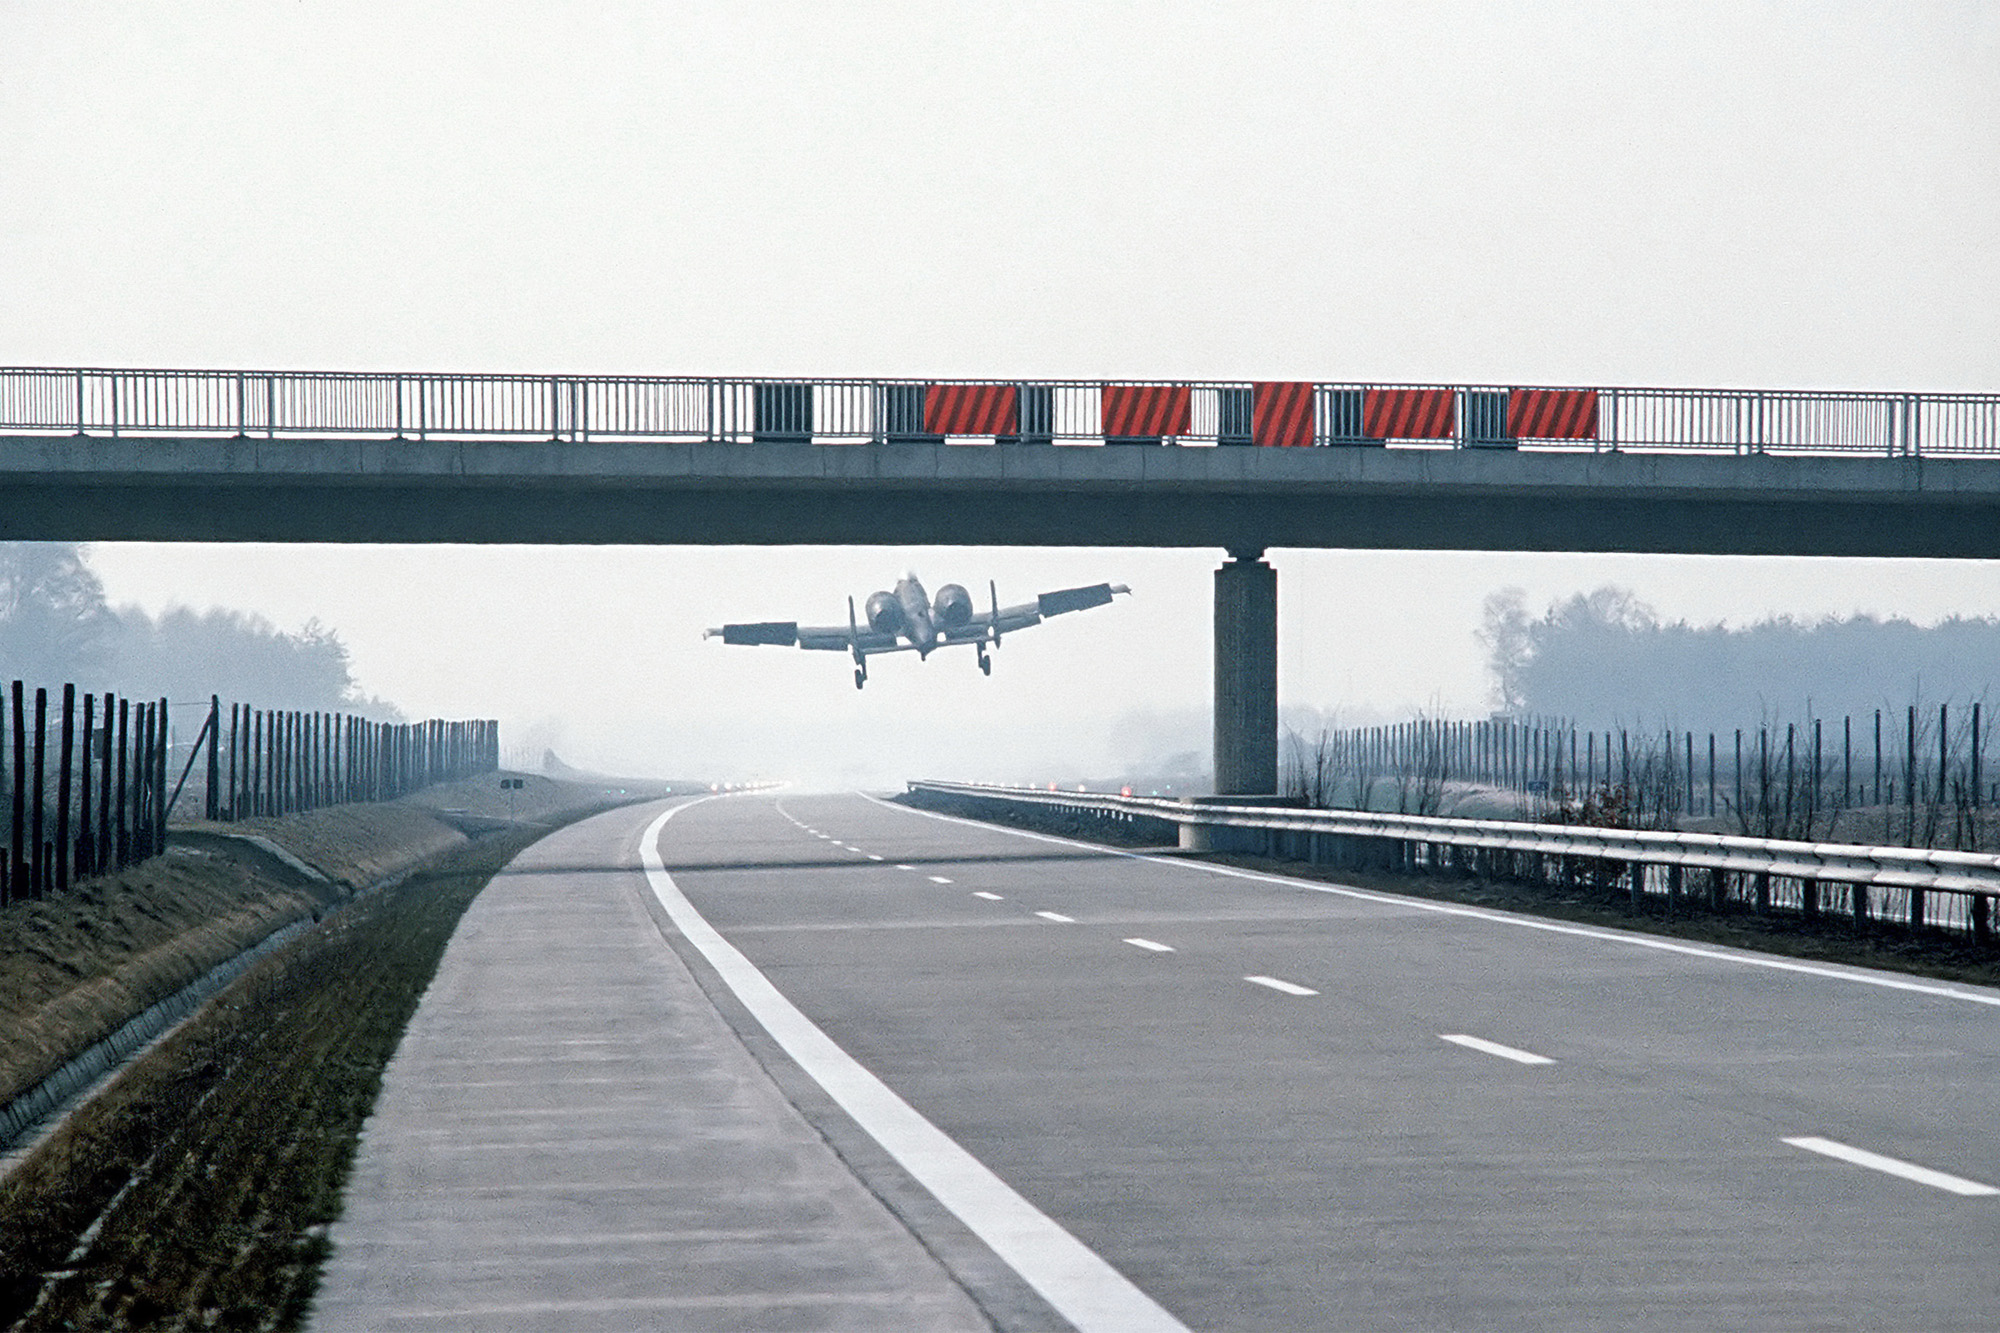 which highway systems in the world are designed to be emergency runways during war